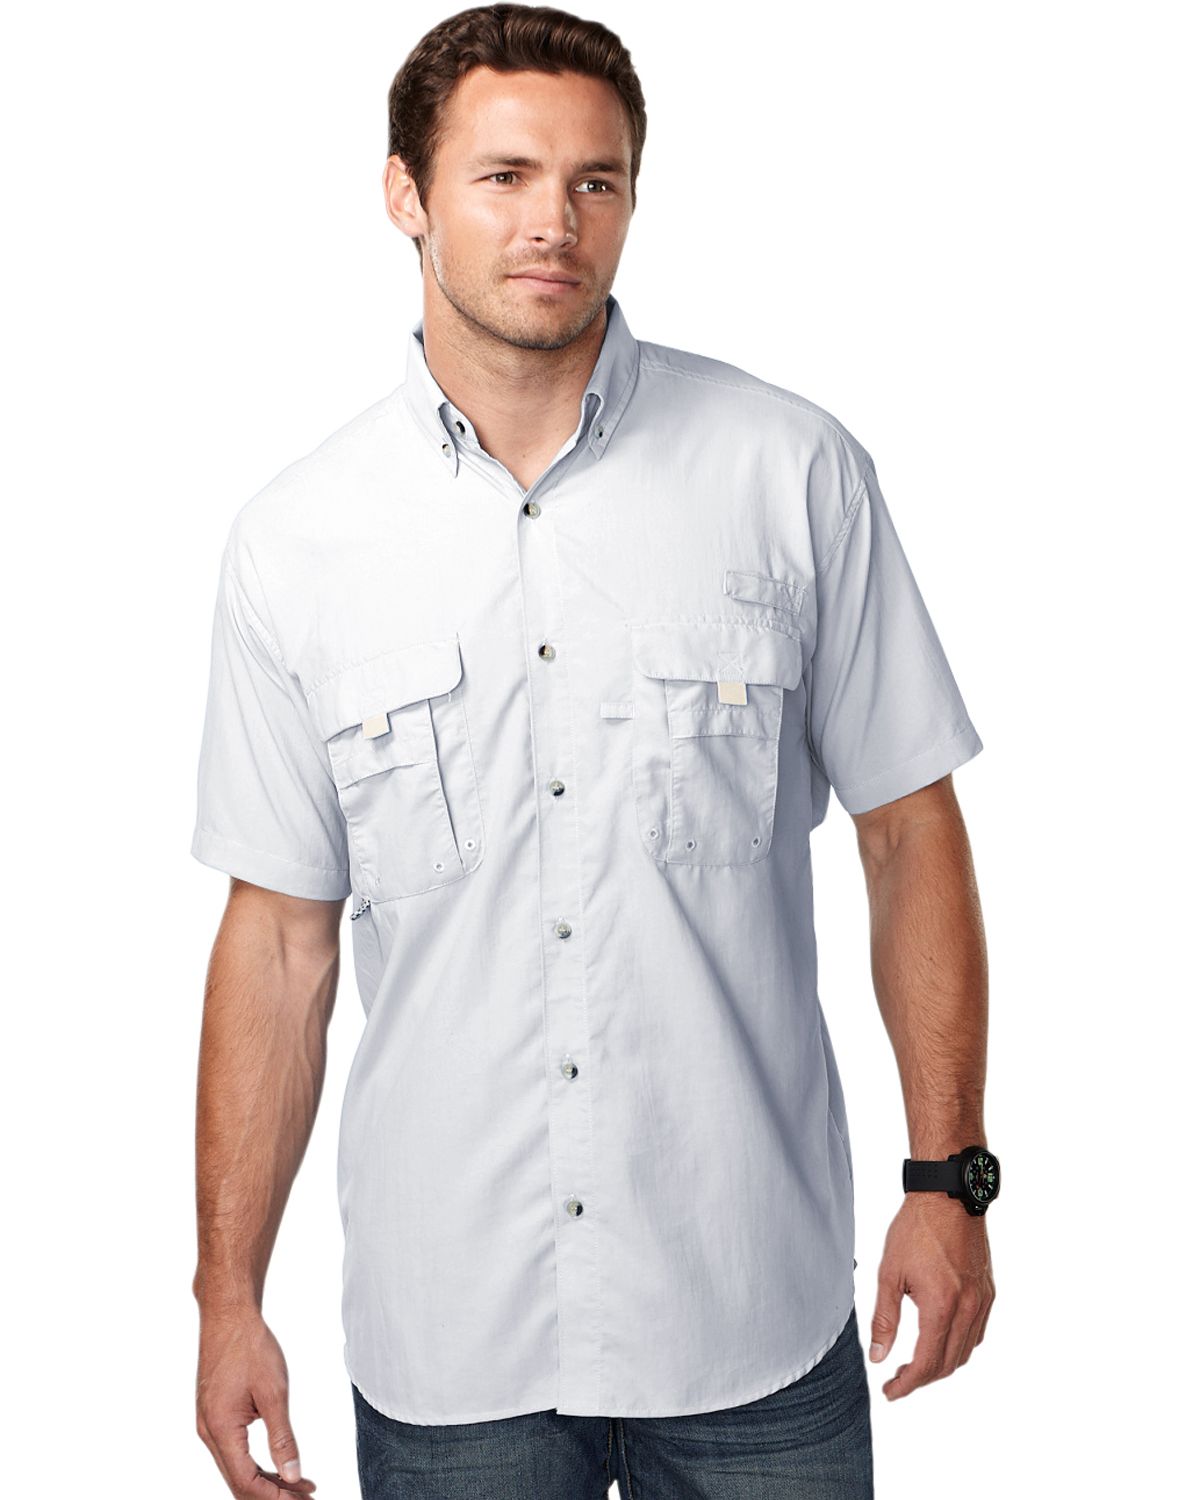 Men nylon shirt with UPF protection and ventilated back.